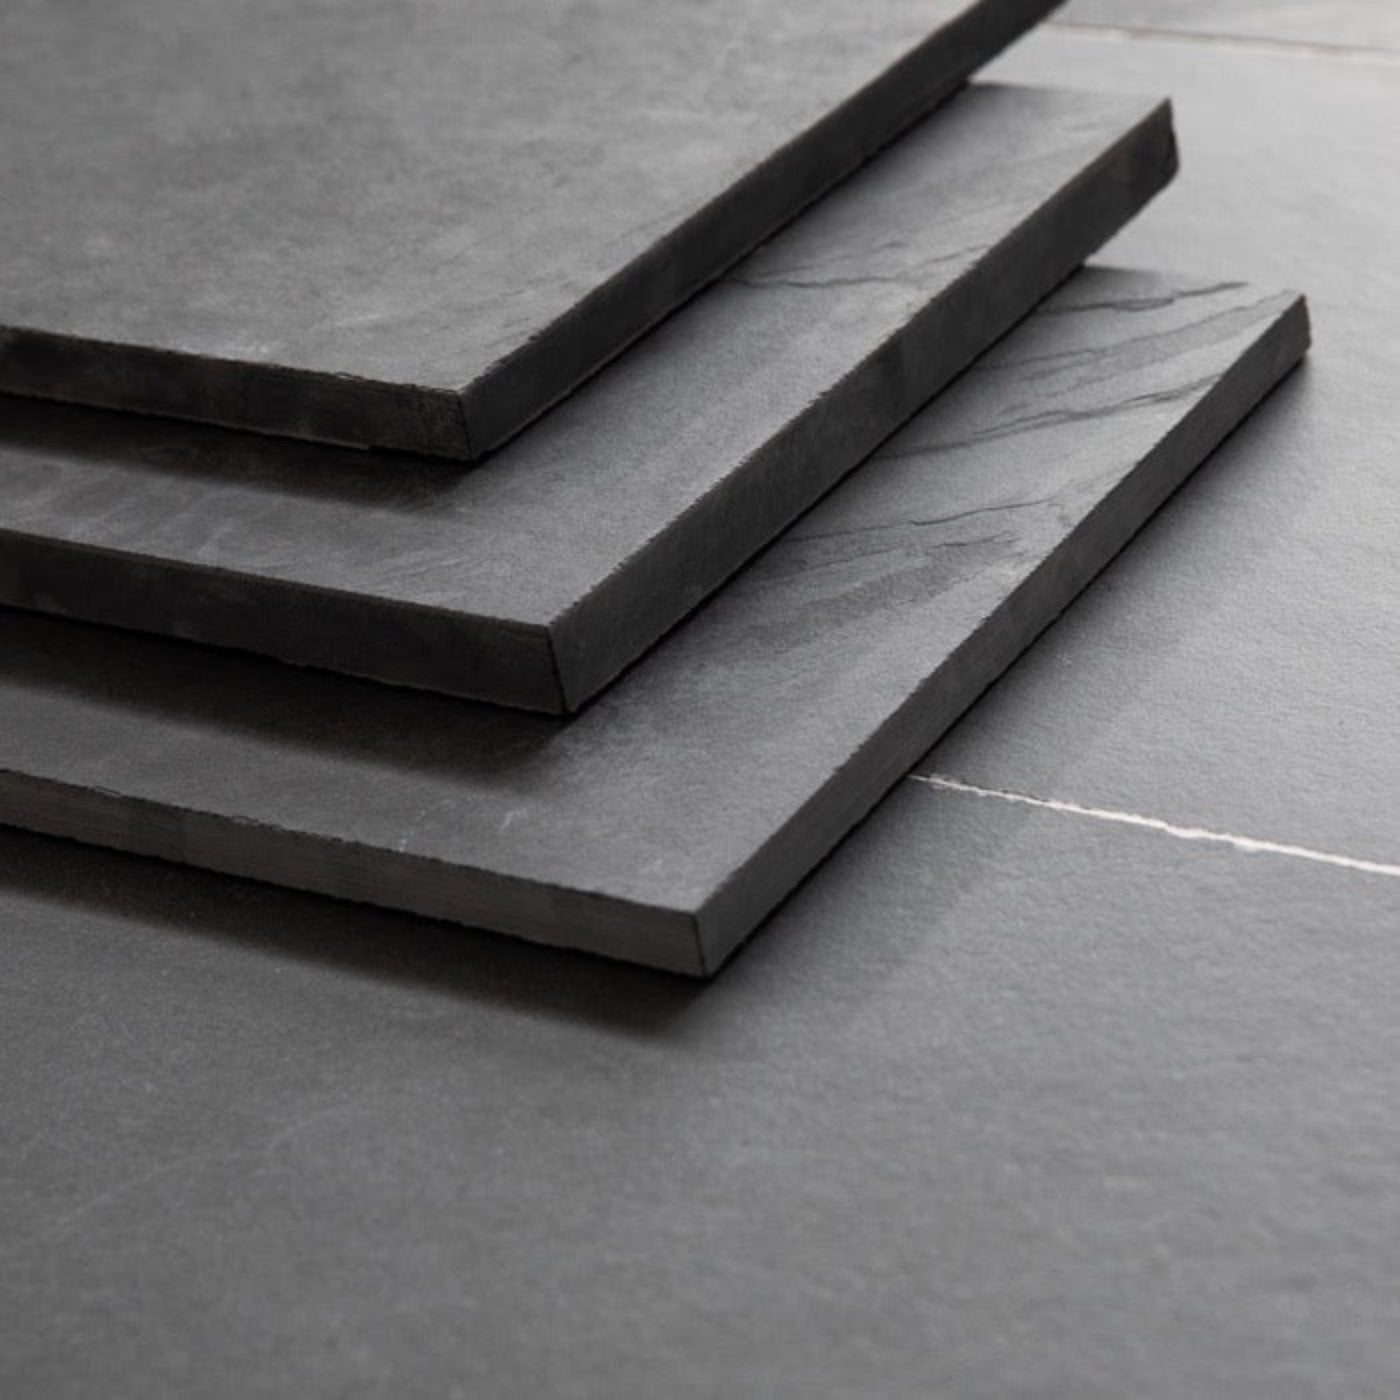 Black Slate Paving Slabs | 600 x 400 x 20 mm | As low as £30.75/m2 | Delivered